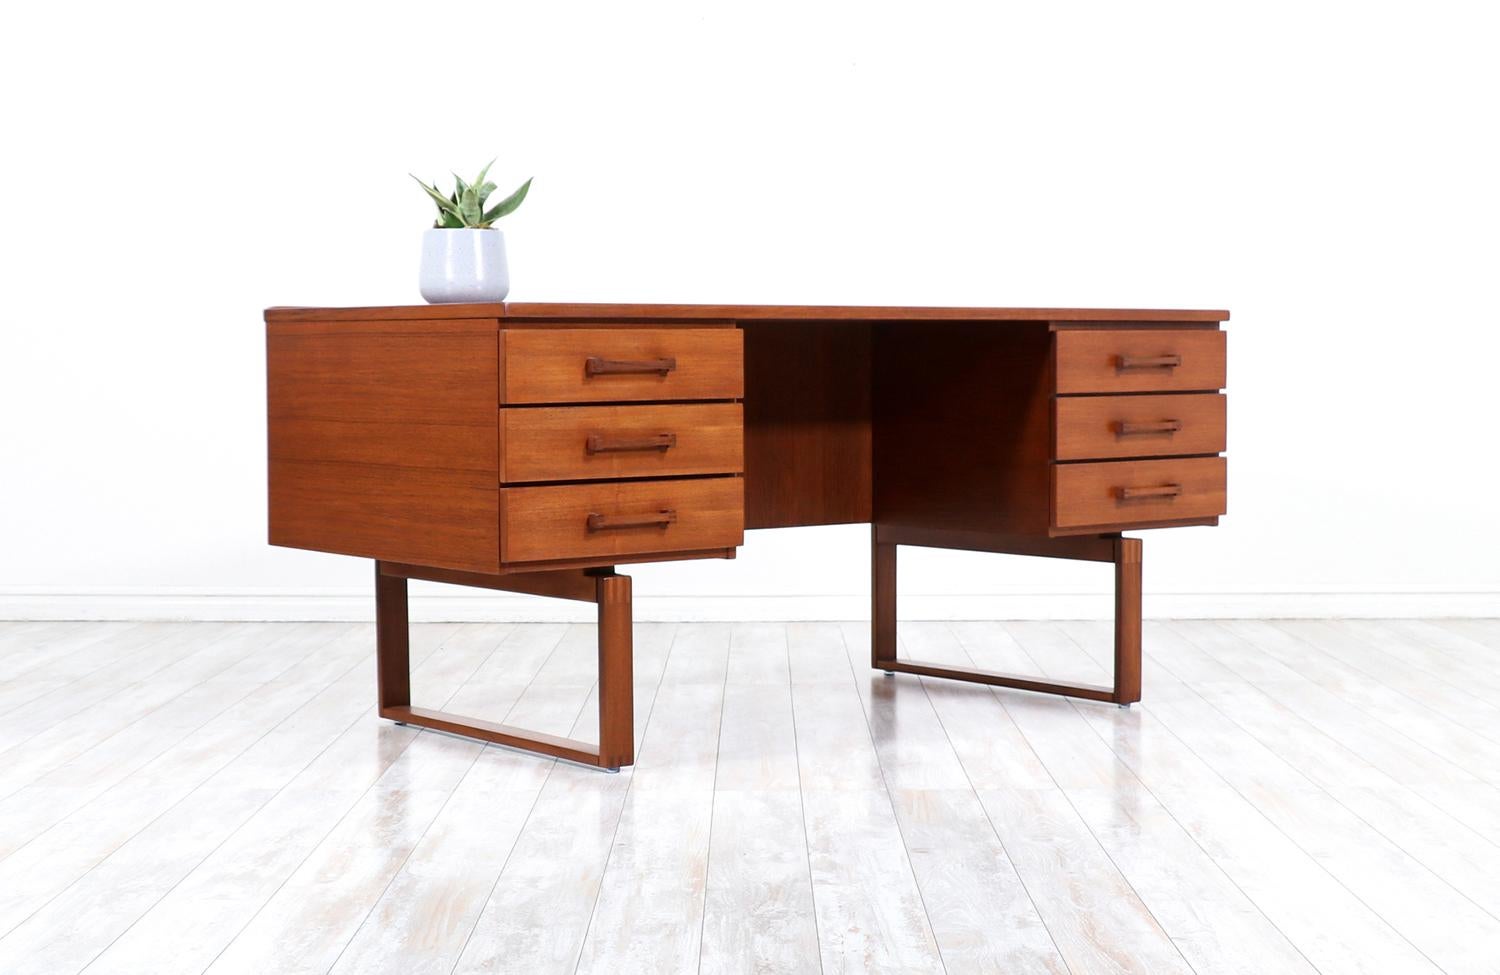 One of our most striking executive desks designed by Henning Jensen & Torbin Valeur in collaboration with the workshop of Dyrlund in Denmark during the 1960s. Our elegant Scandinavian desk features a solid teak frame with a stunning warm grain